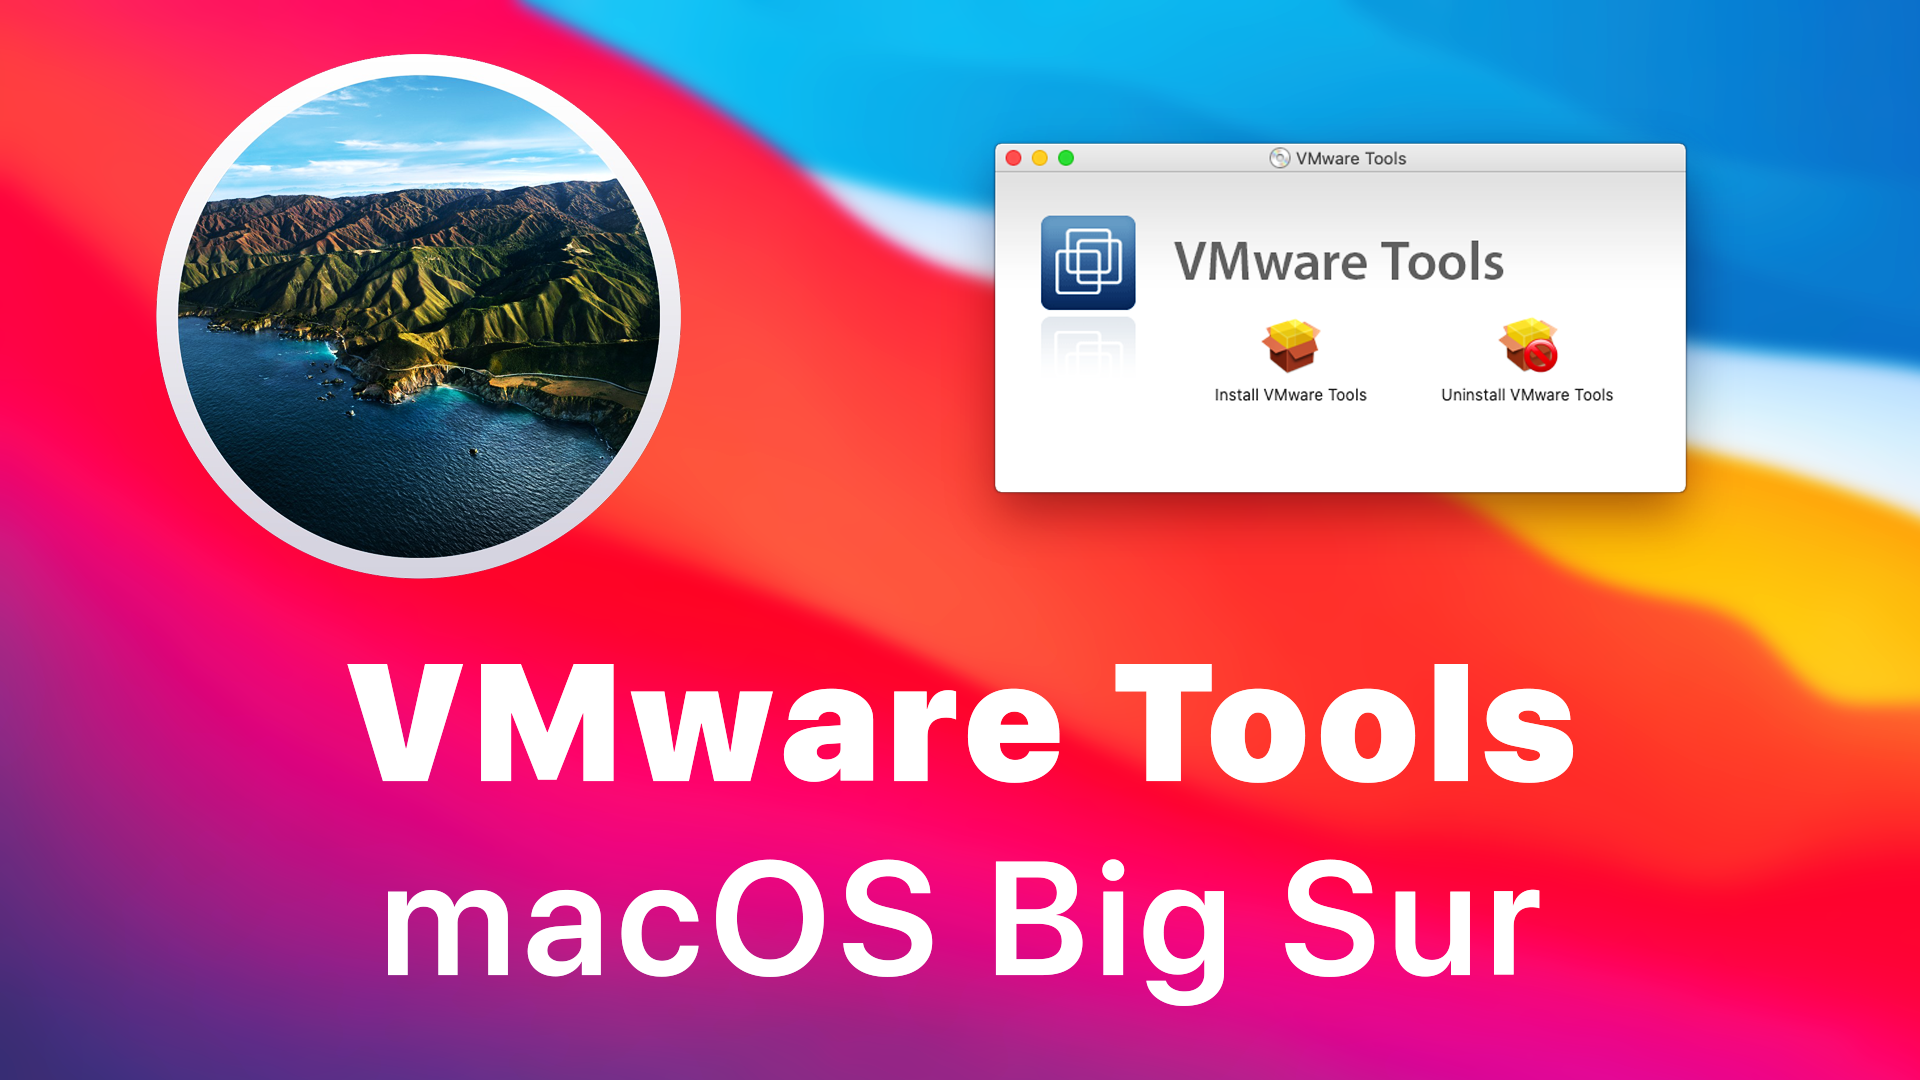 vmware workstation 11 cannot install vmware tools mac os x